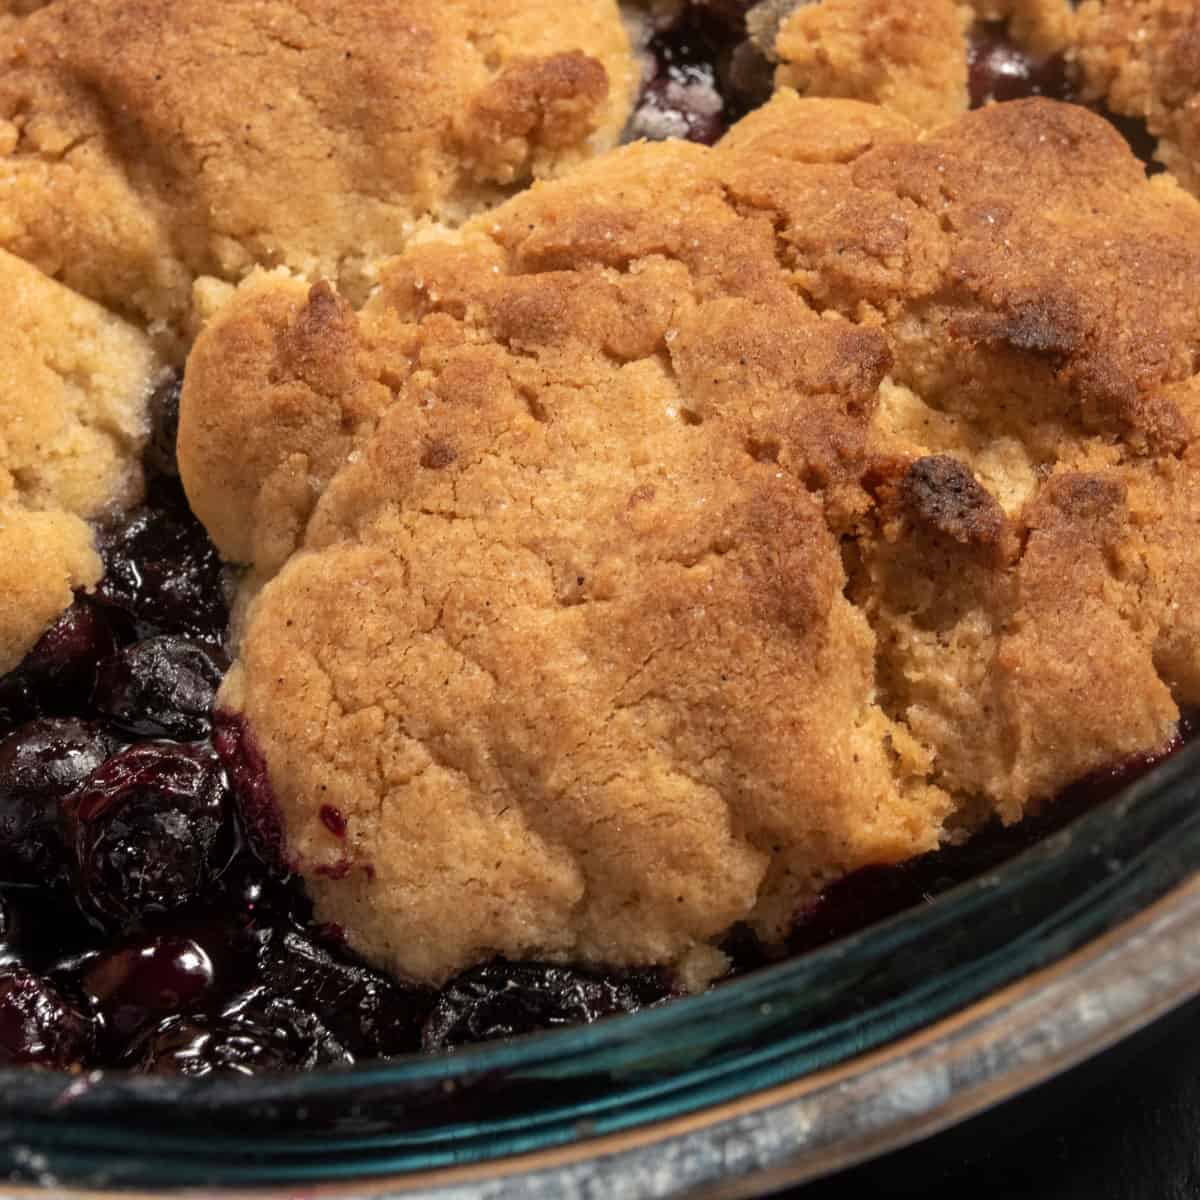 A close up image of my vegan blueberry cobbler which is bubbling inside the ovenproof dish. 